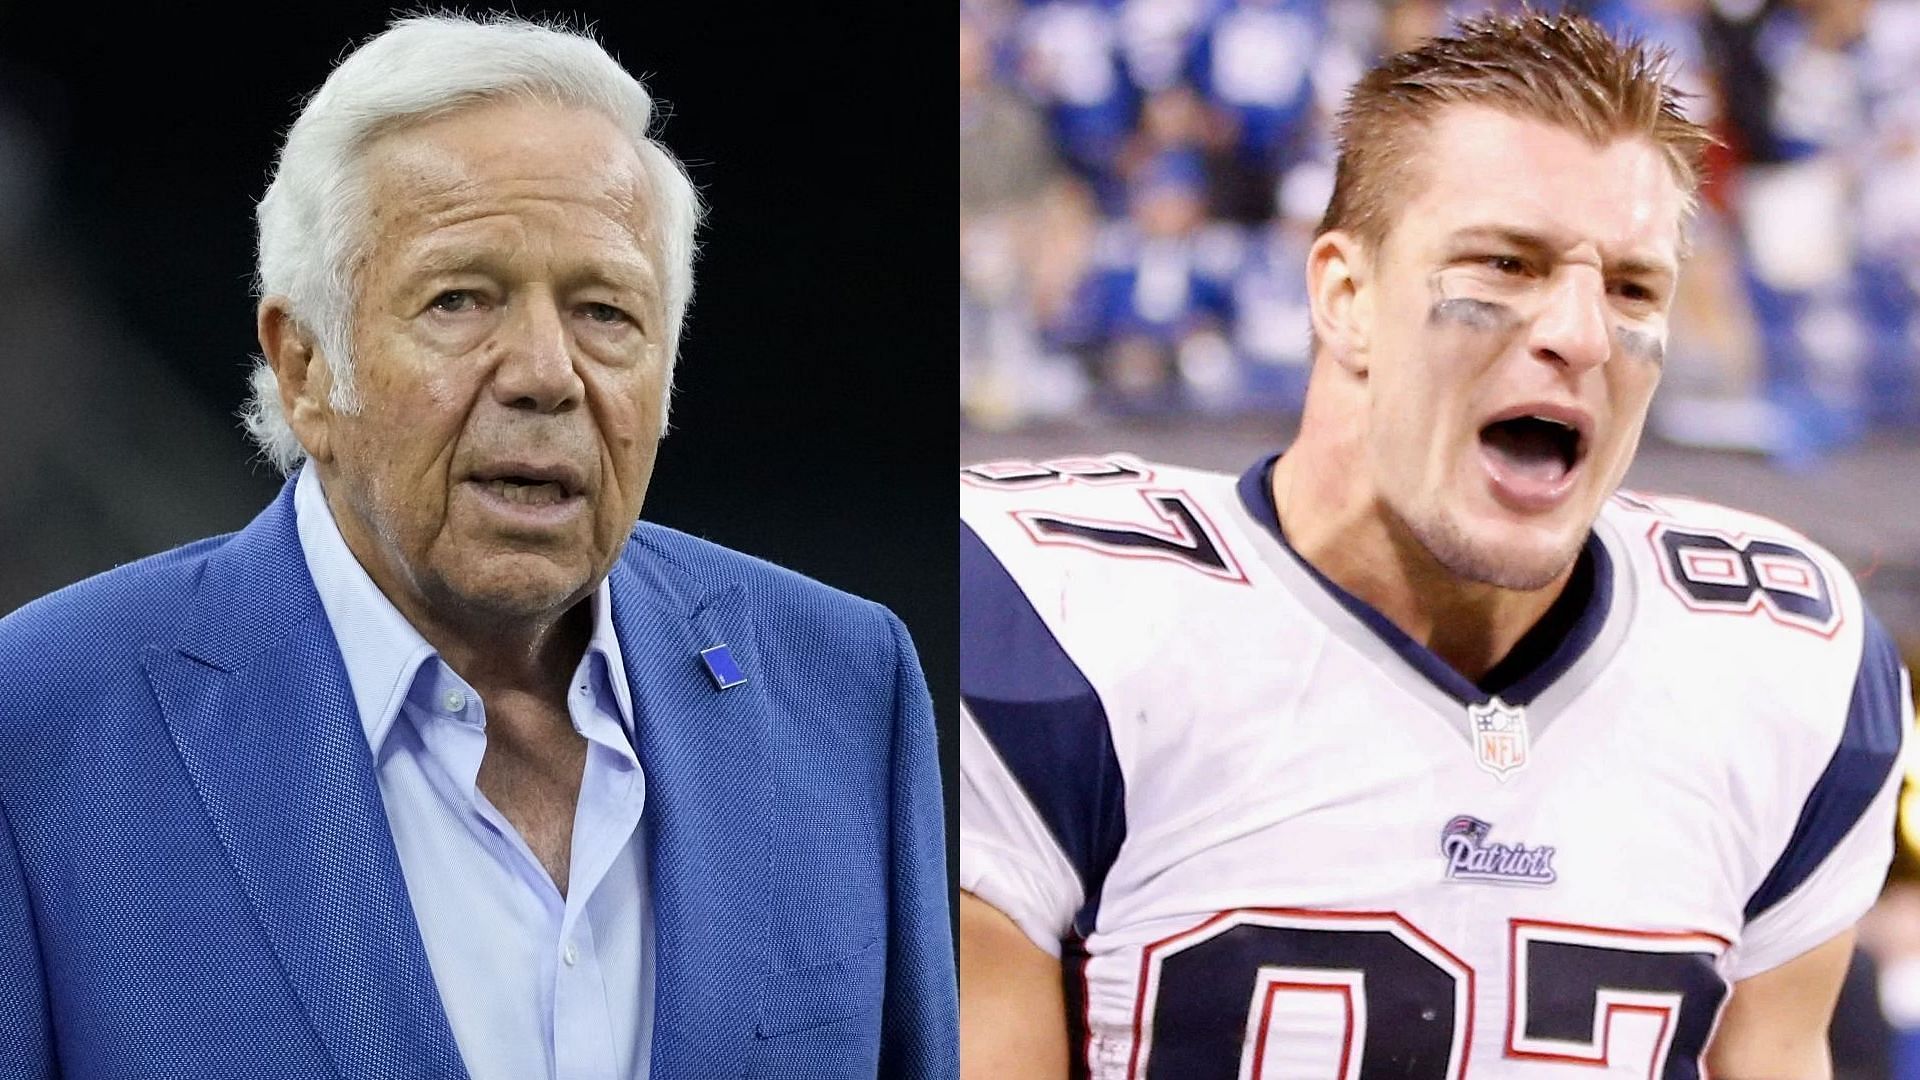 New England Patriots owner Robert Kraft and former NFL tight end Rob Gronkowski